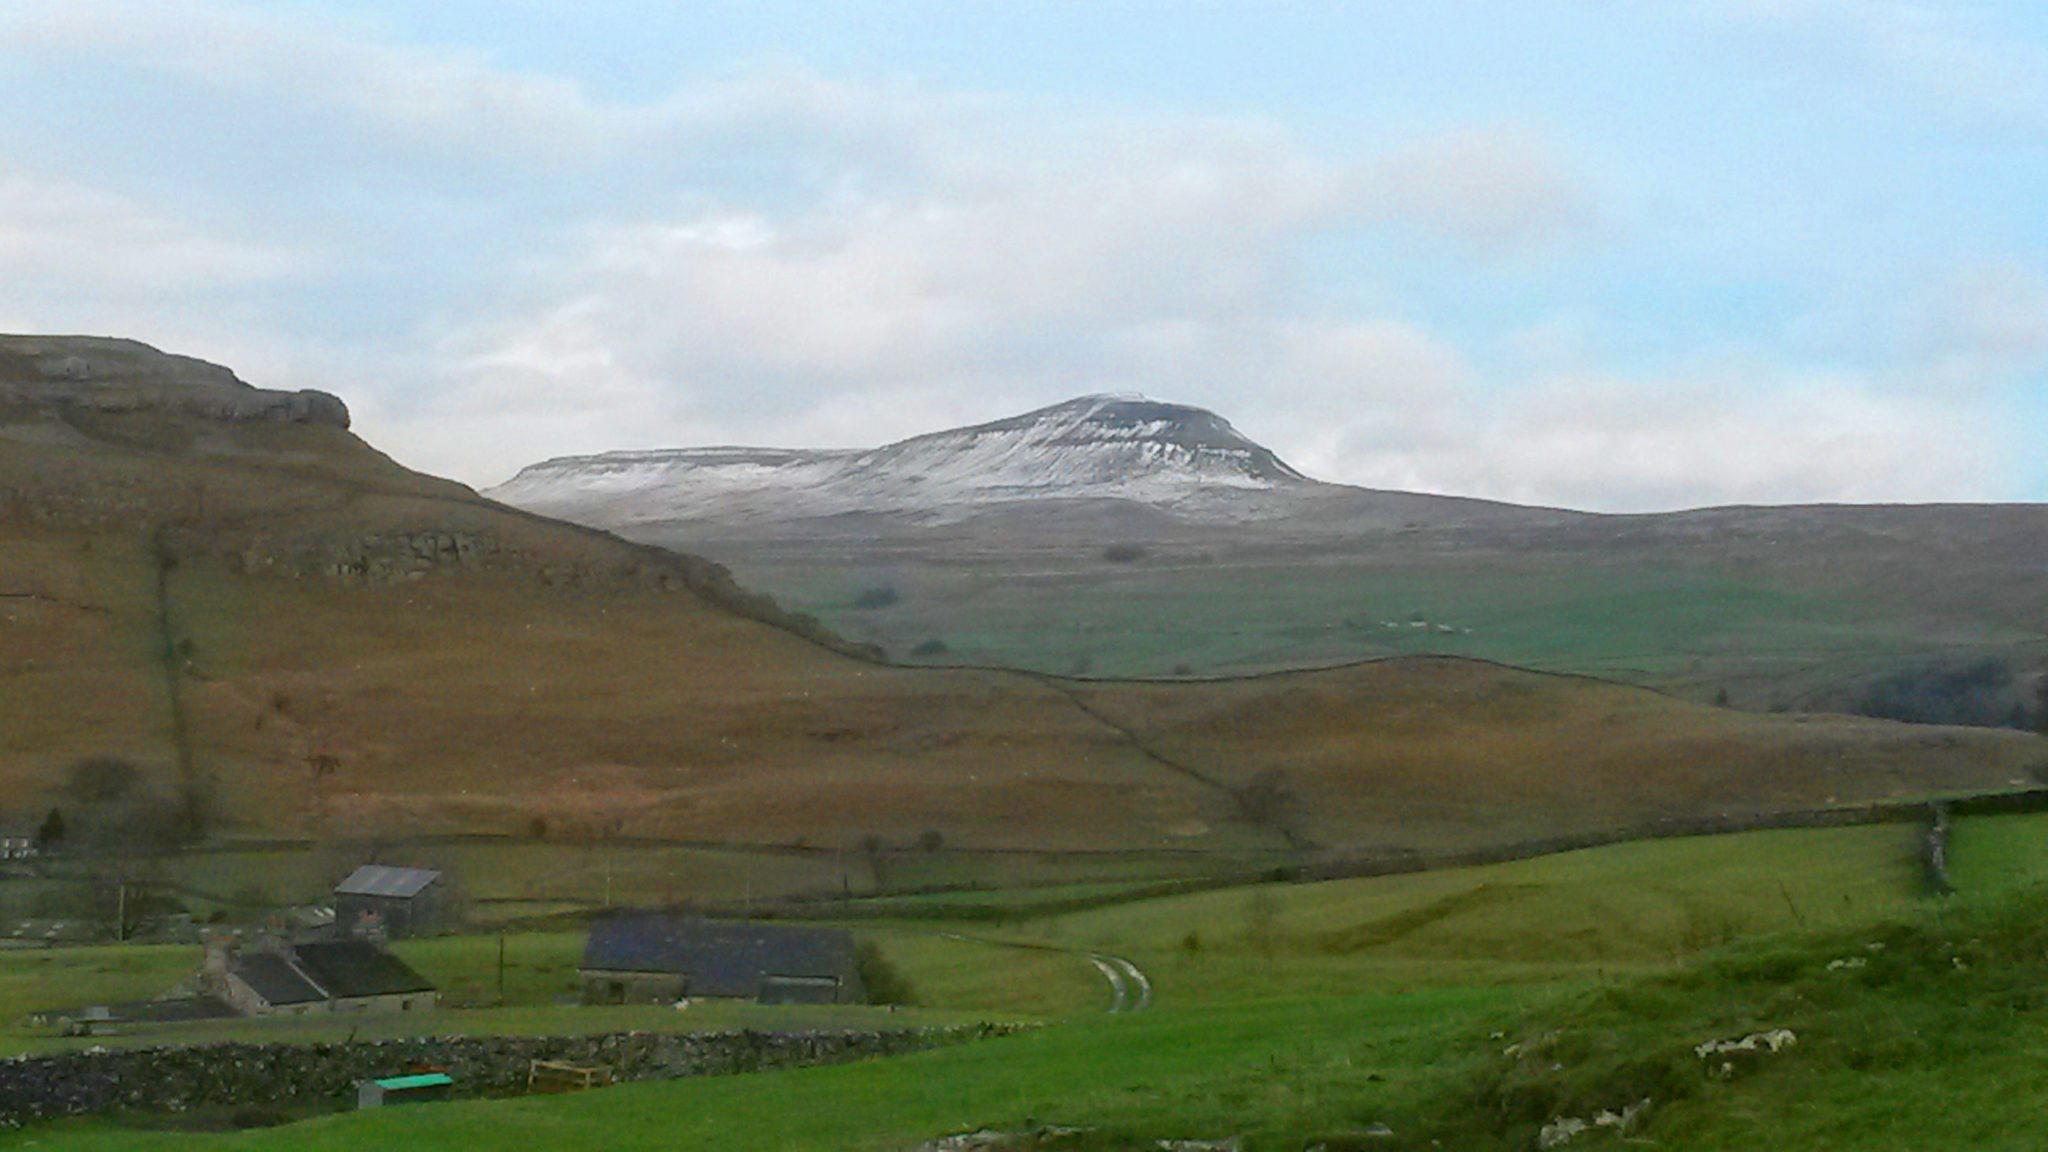 The iconic hill Ingleborough, in the Yorkshire Dales. Photo: Tony Brocklebank